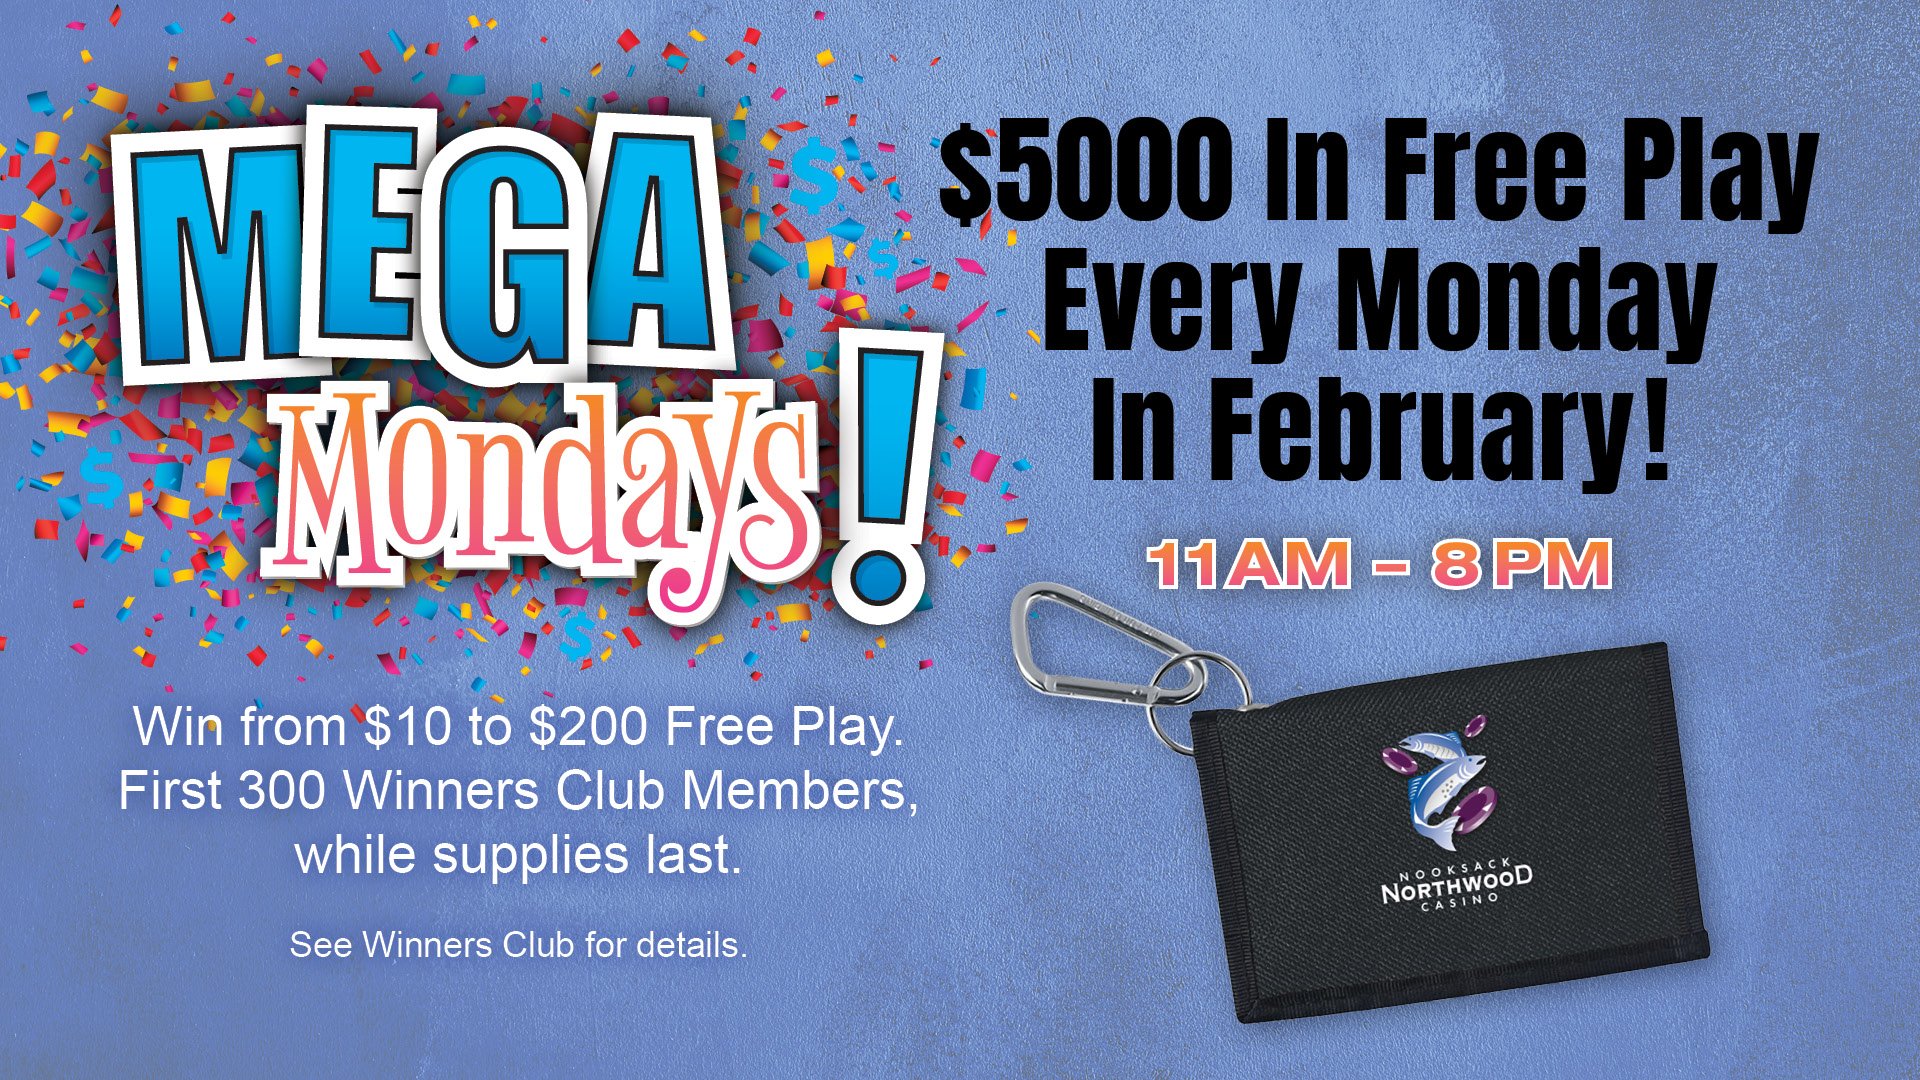 Get up to $500 Free Play on Mondays